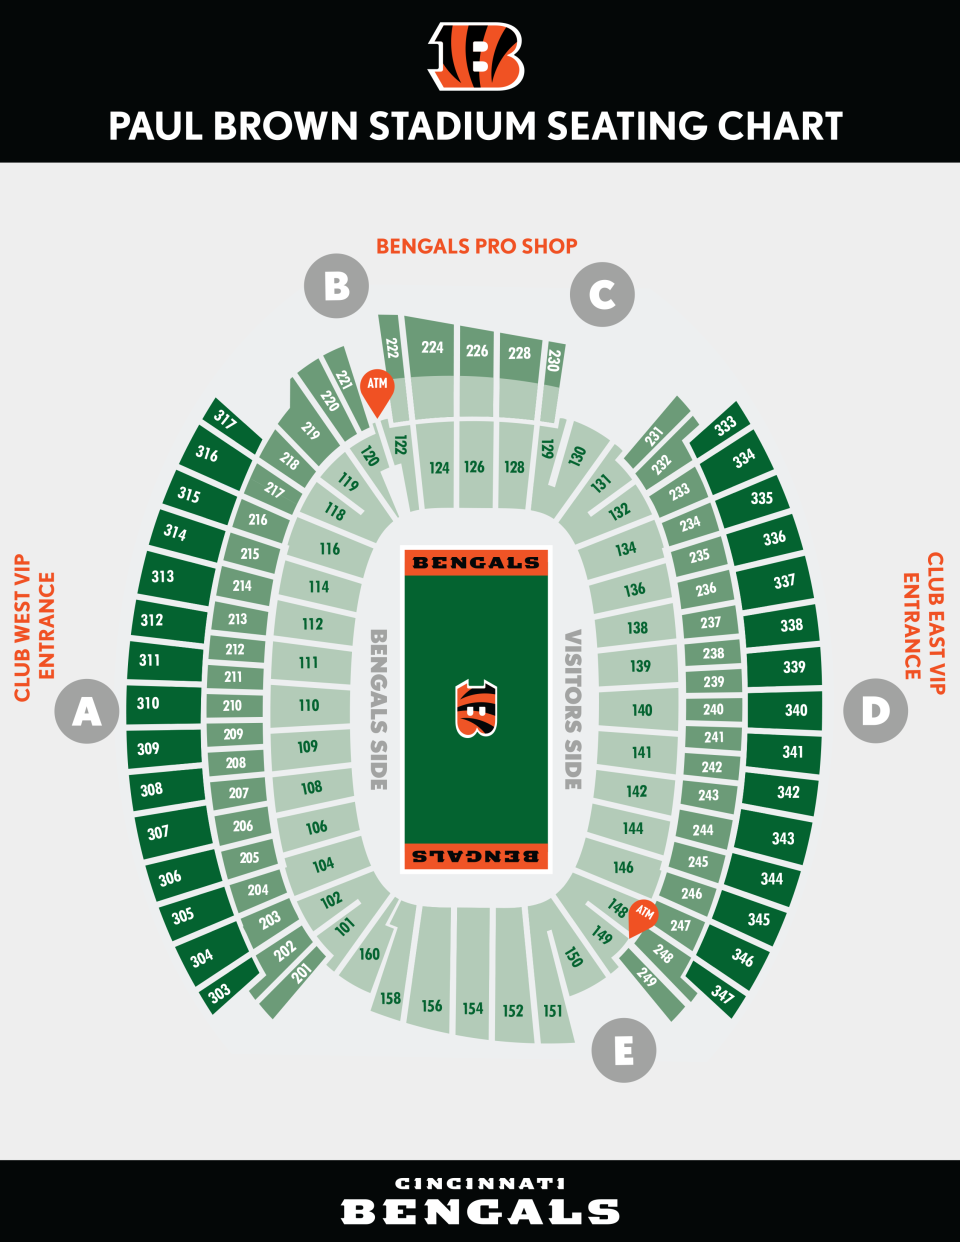 Paul Brown Stadium seating chart from Bengals.com